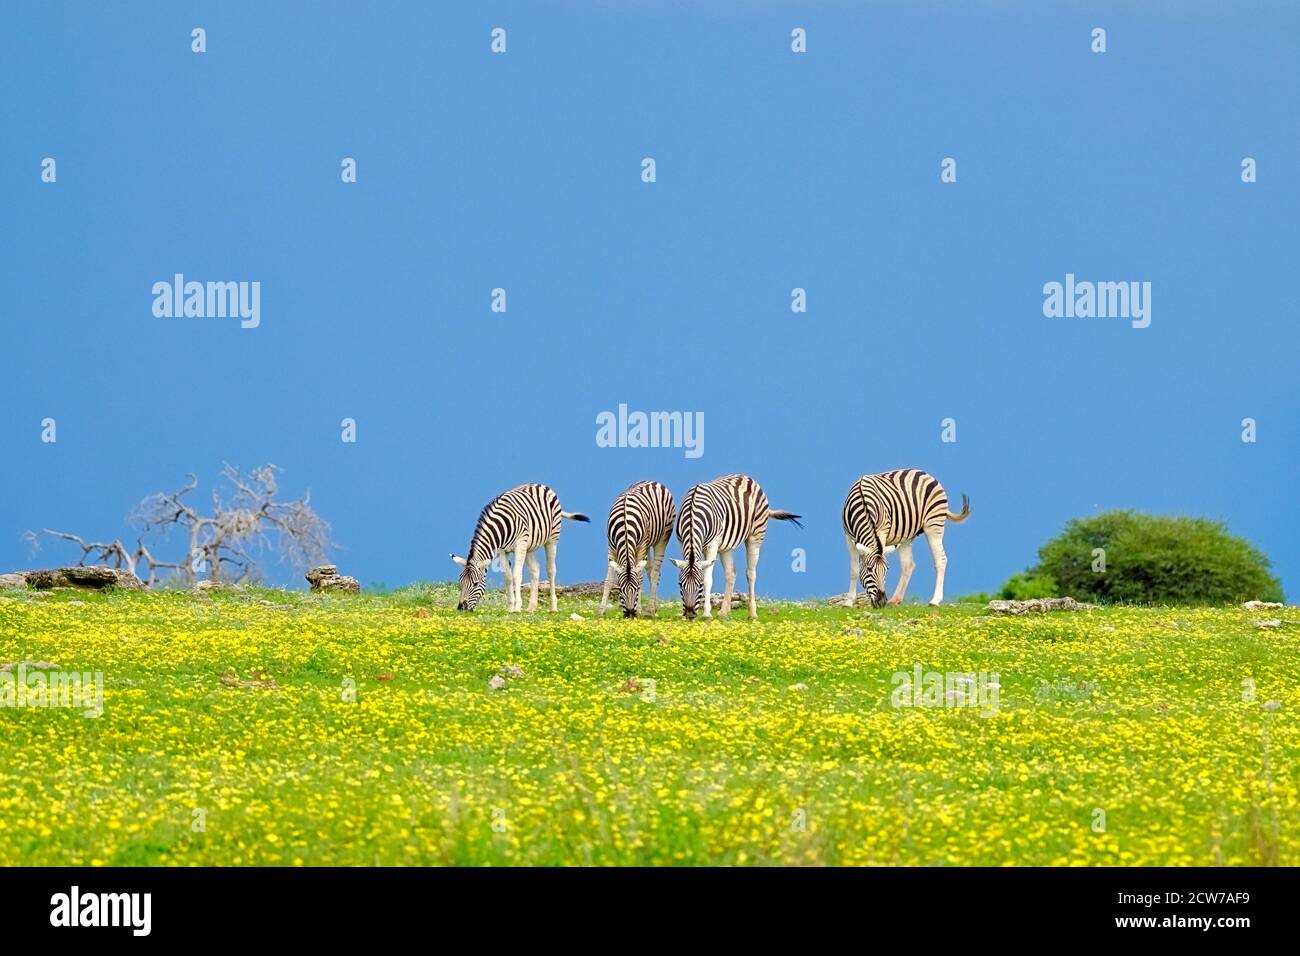 Zebras grazing, Equus quagga burchellii, on a yellow flower field. Colorful African scenery in Etosha National Park, Namibia, Africa.. Stock Photo